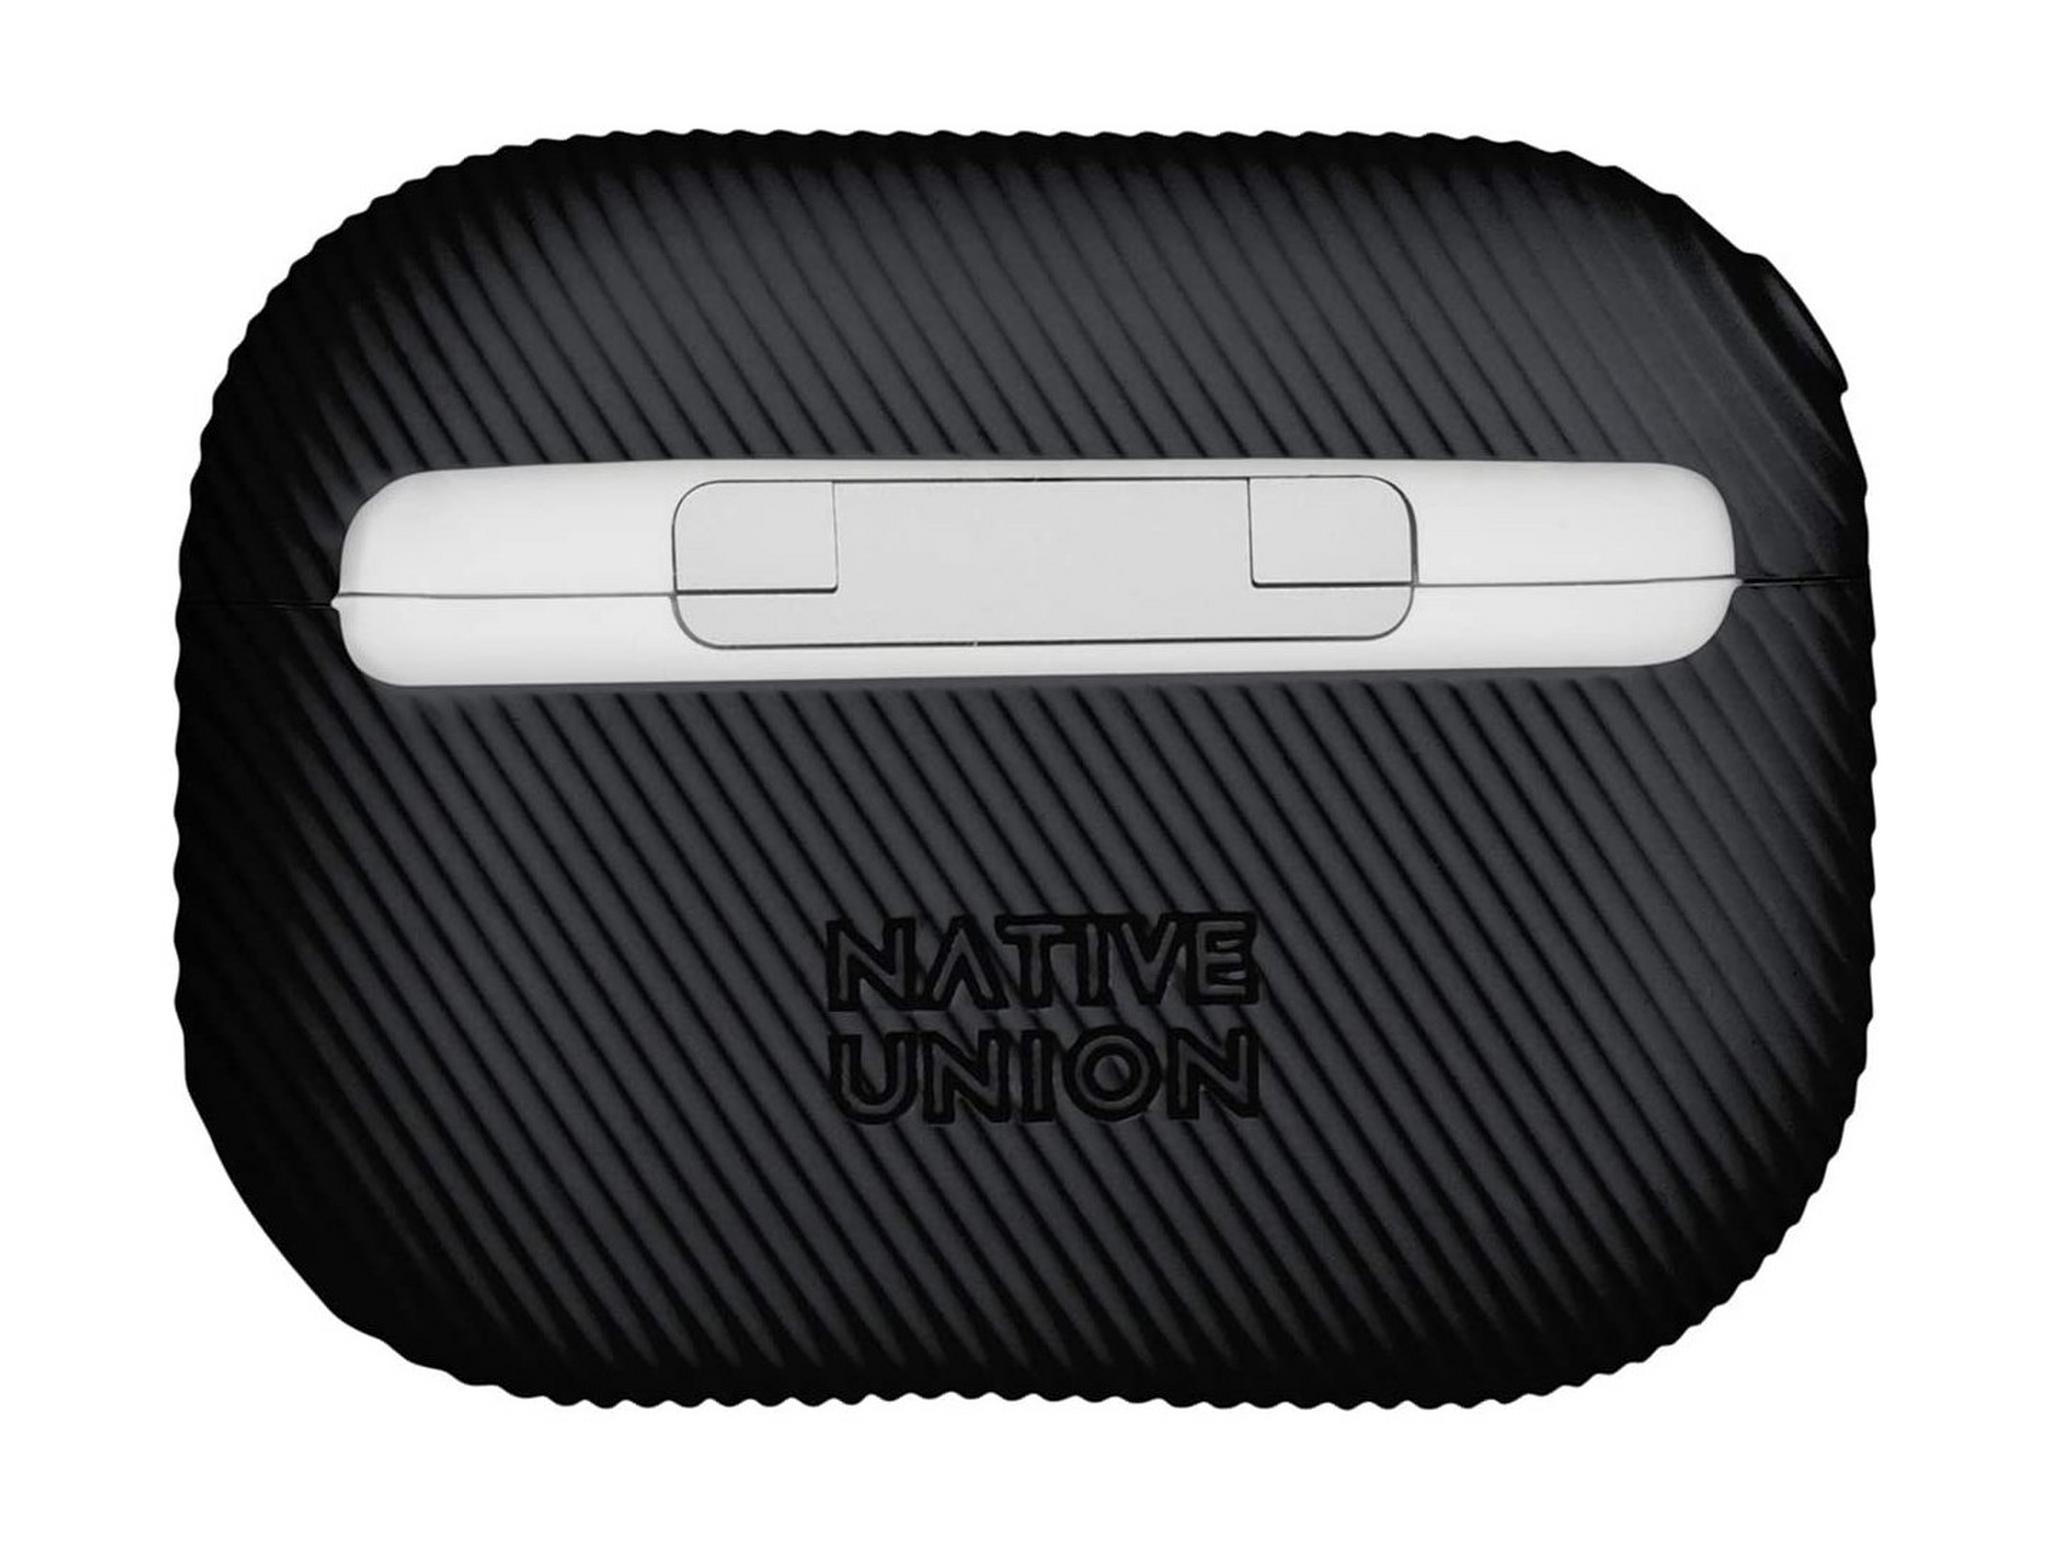 Appro Native Union Curve Case for Airpods Pro - Black